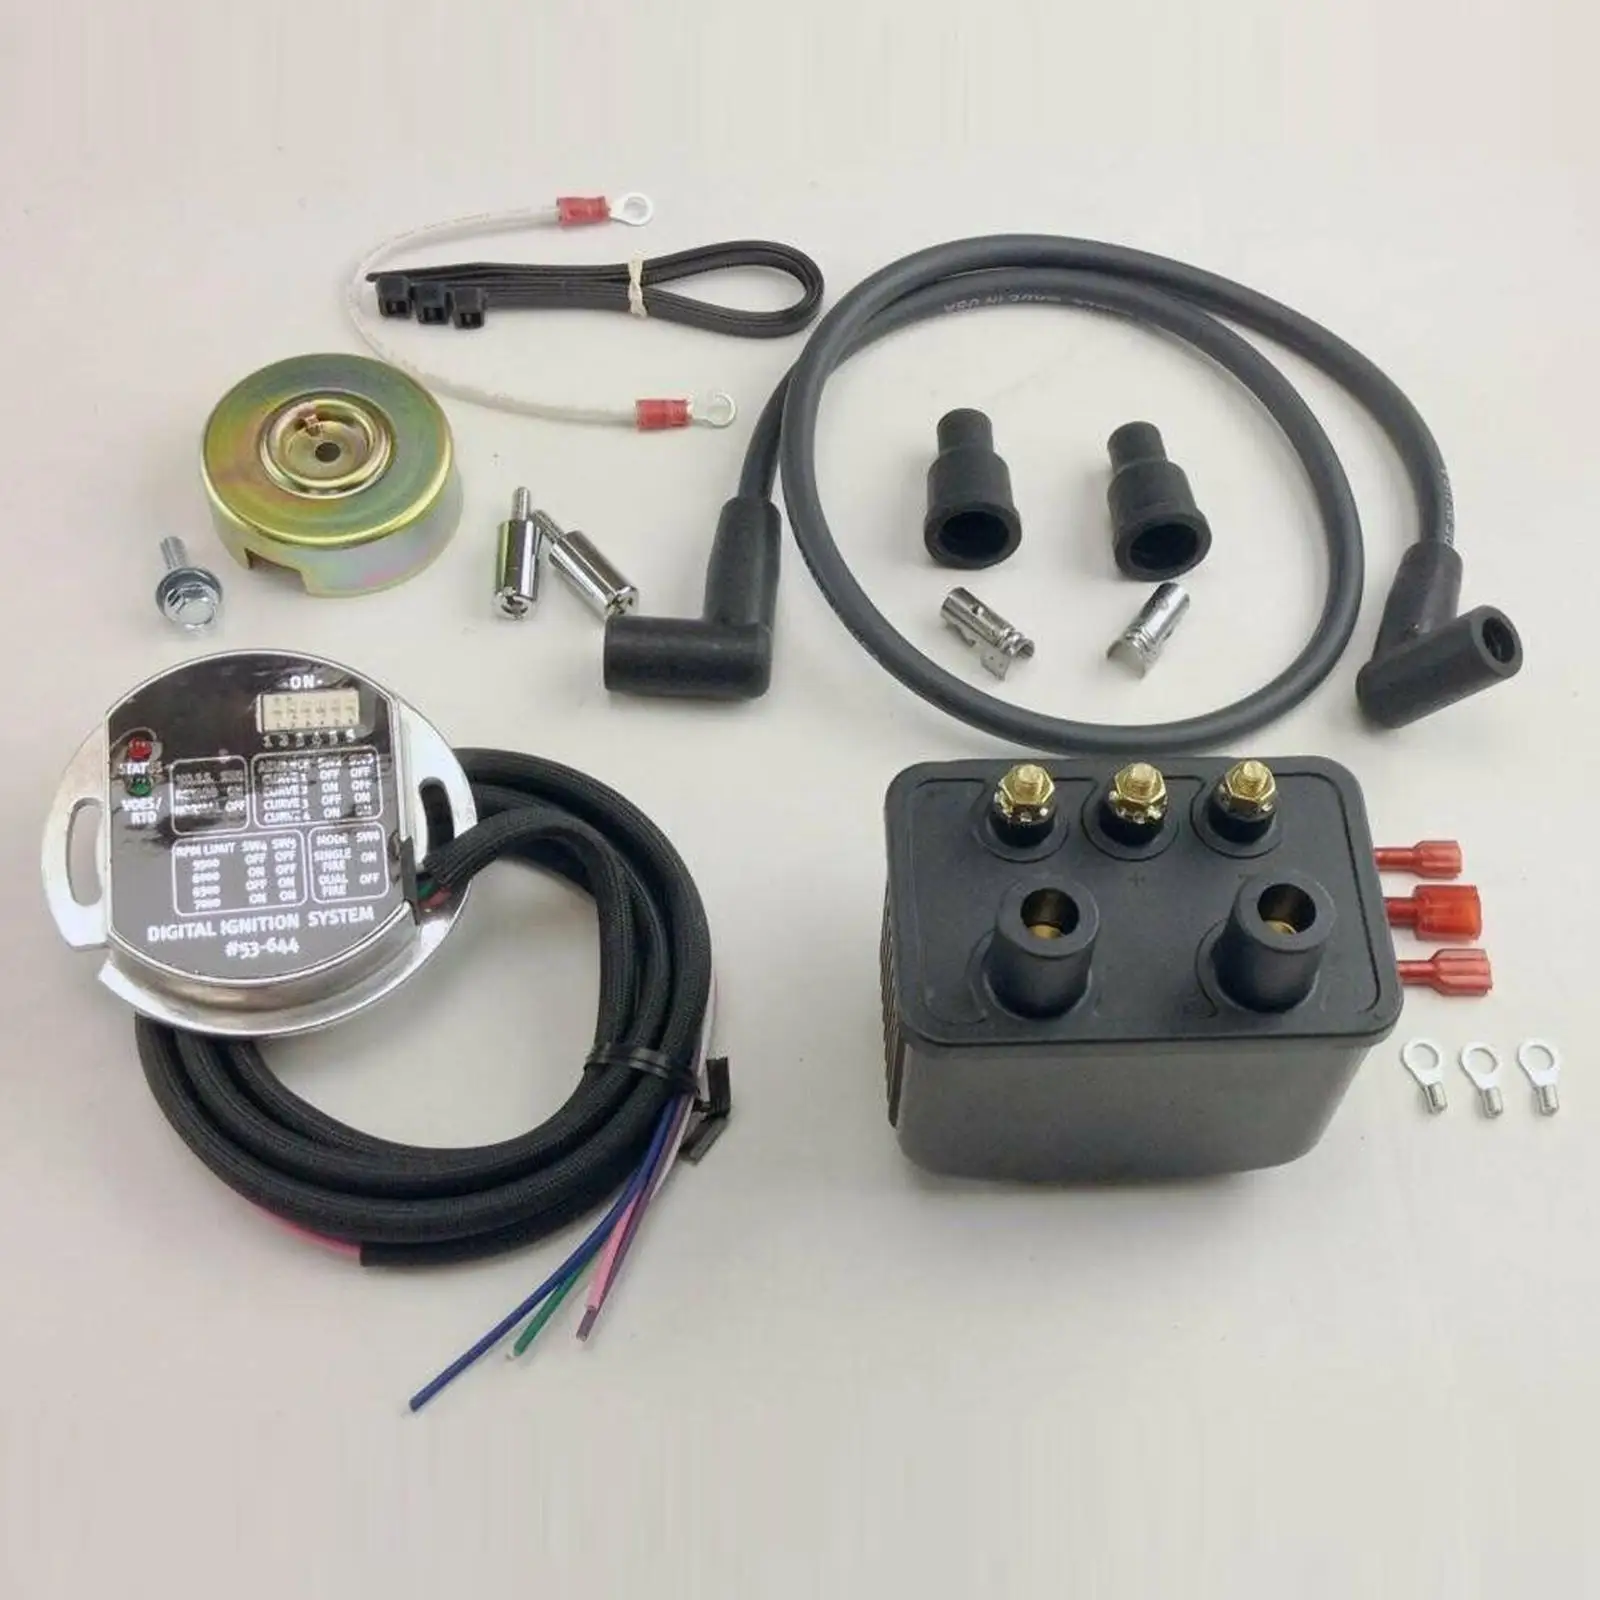 Single Fire Programmable Ignition Kit Accessory Replaces for Harley Shovelhead Sportst Repair Part Easy to Install Quality